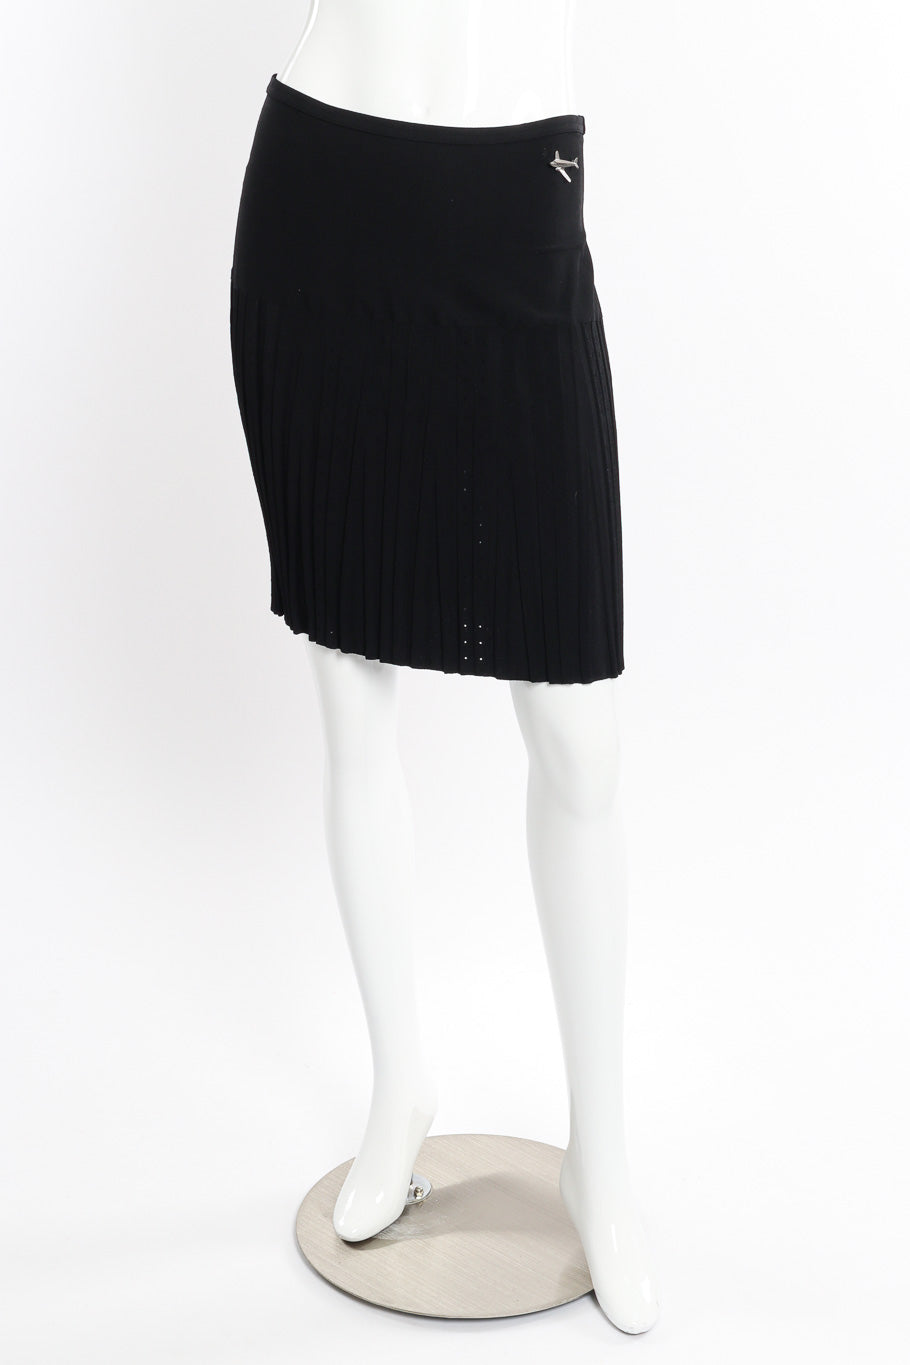 Top and skirt set by Chanel on mannequin skirt only @recessla